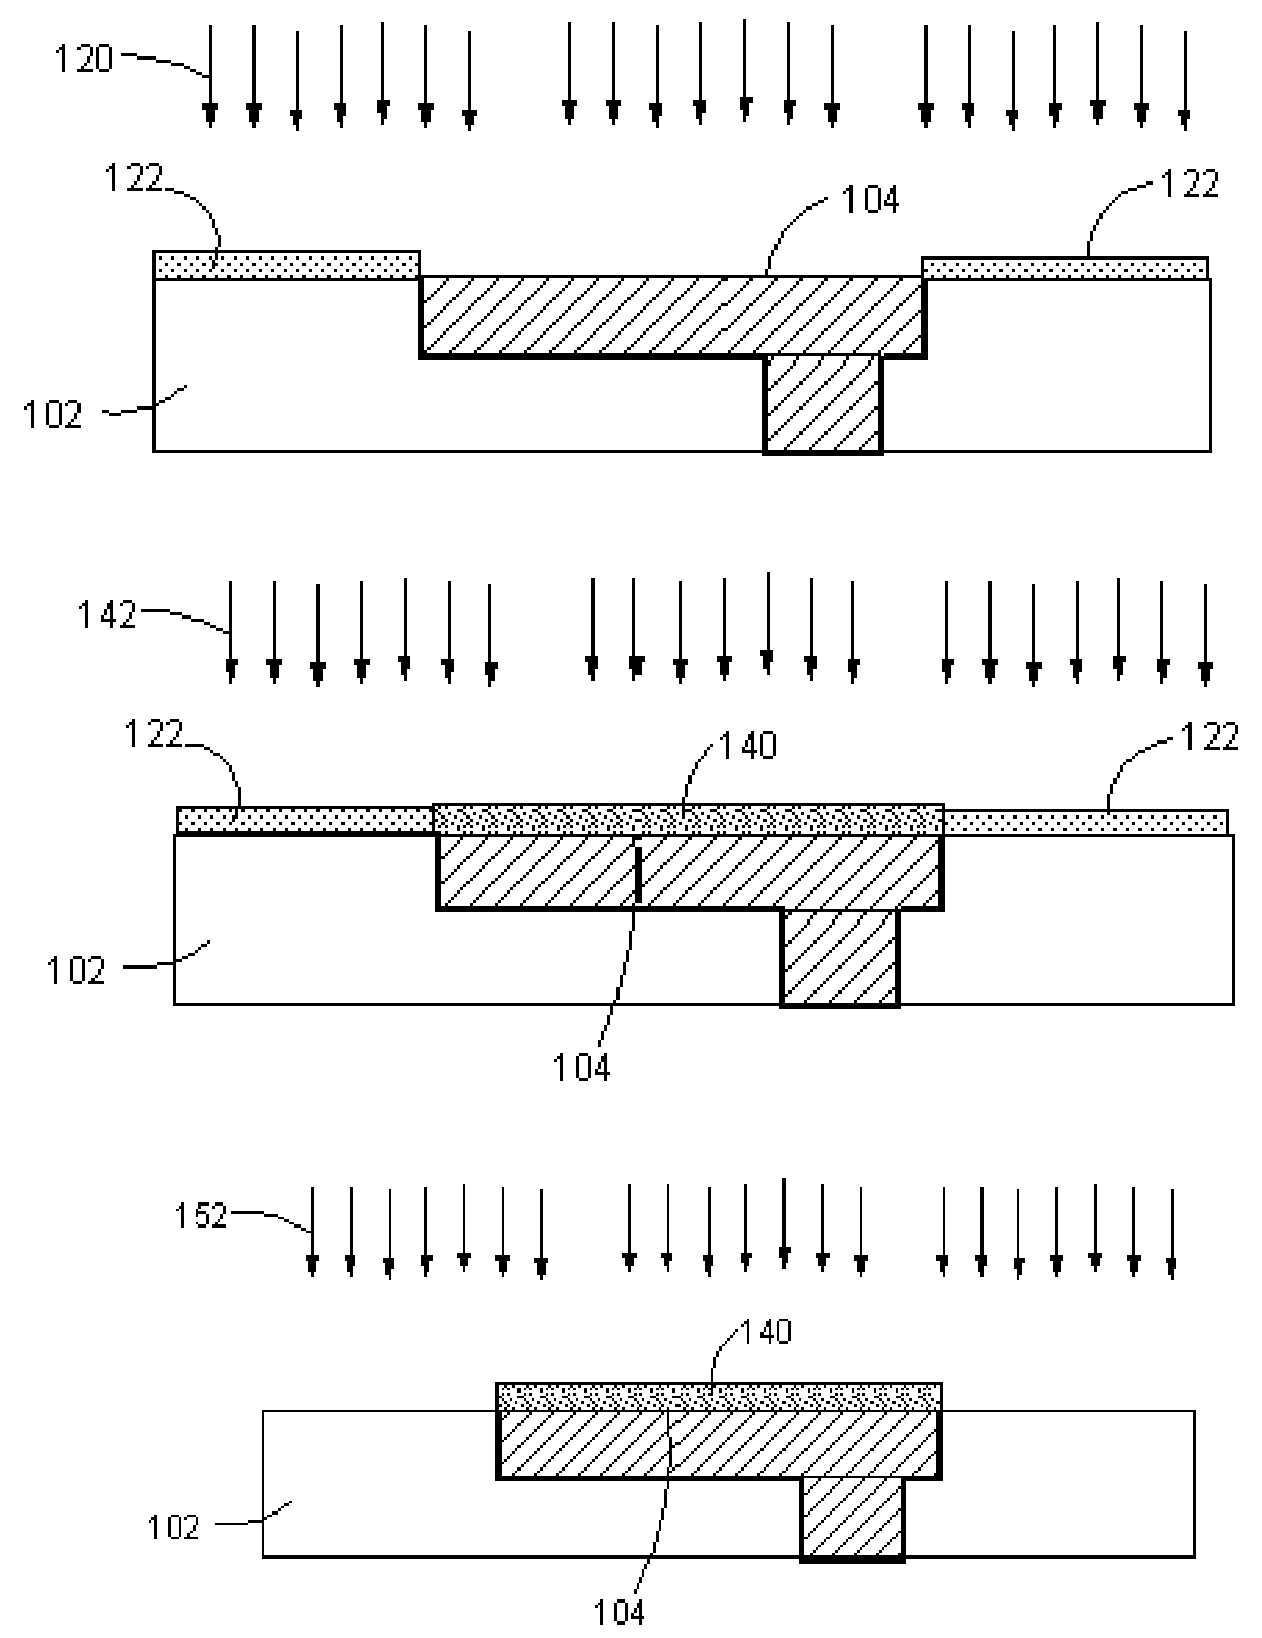 Forming capping layer over metal wire structure using selective atomic layer deposition